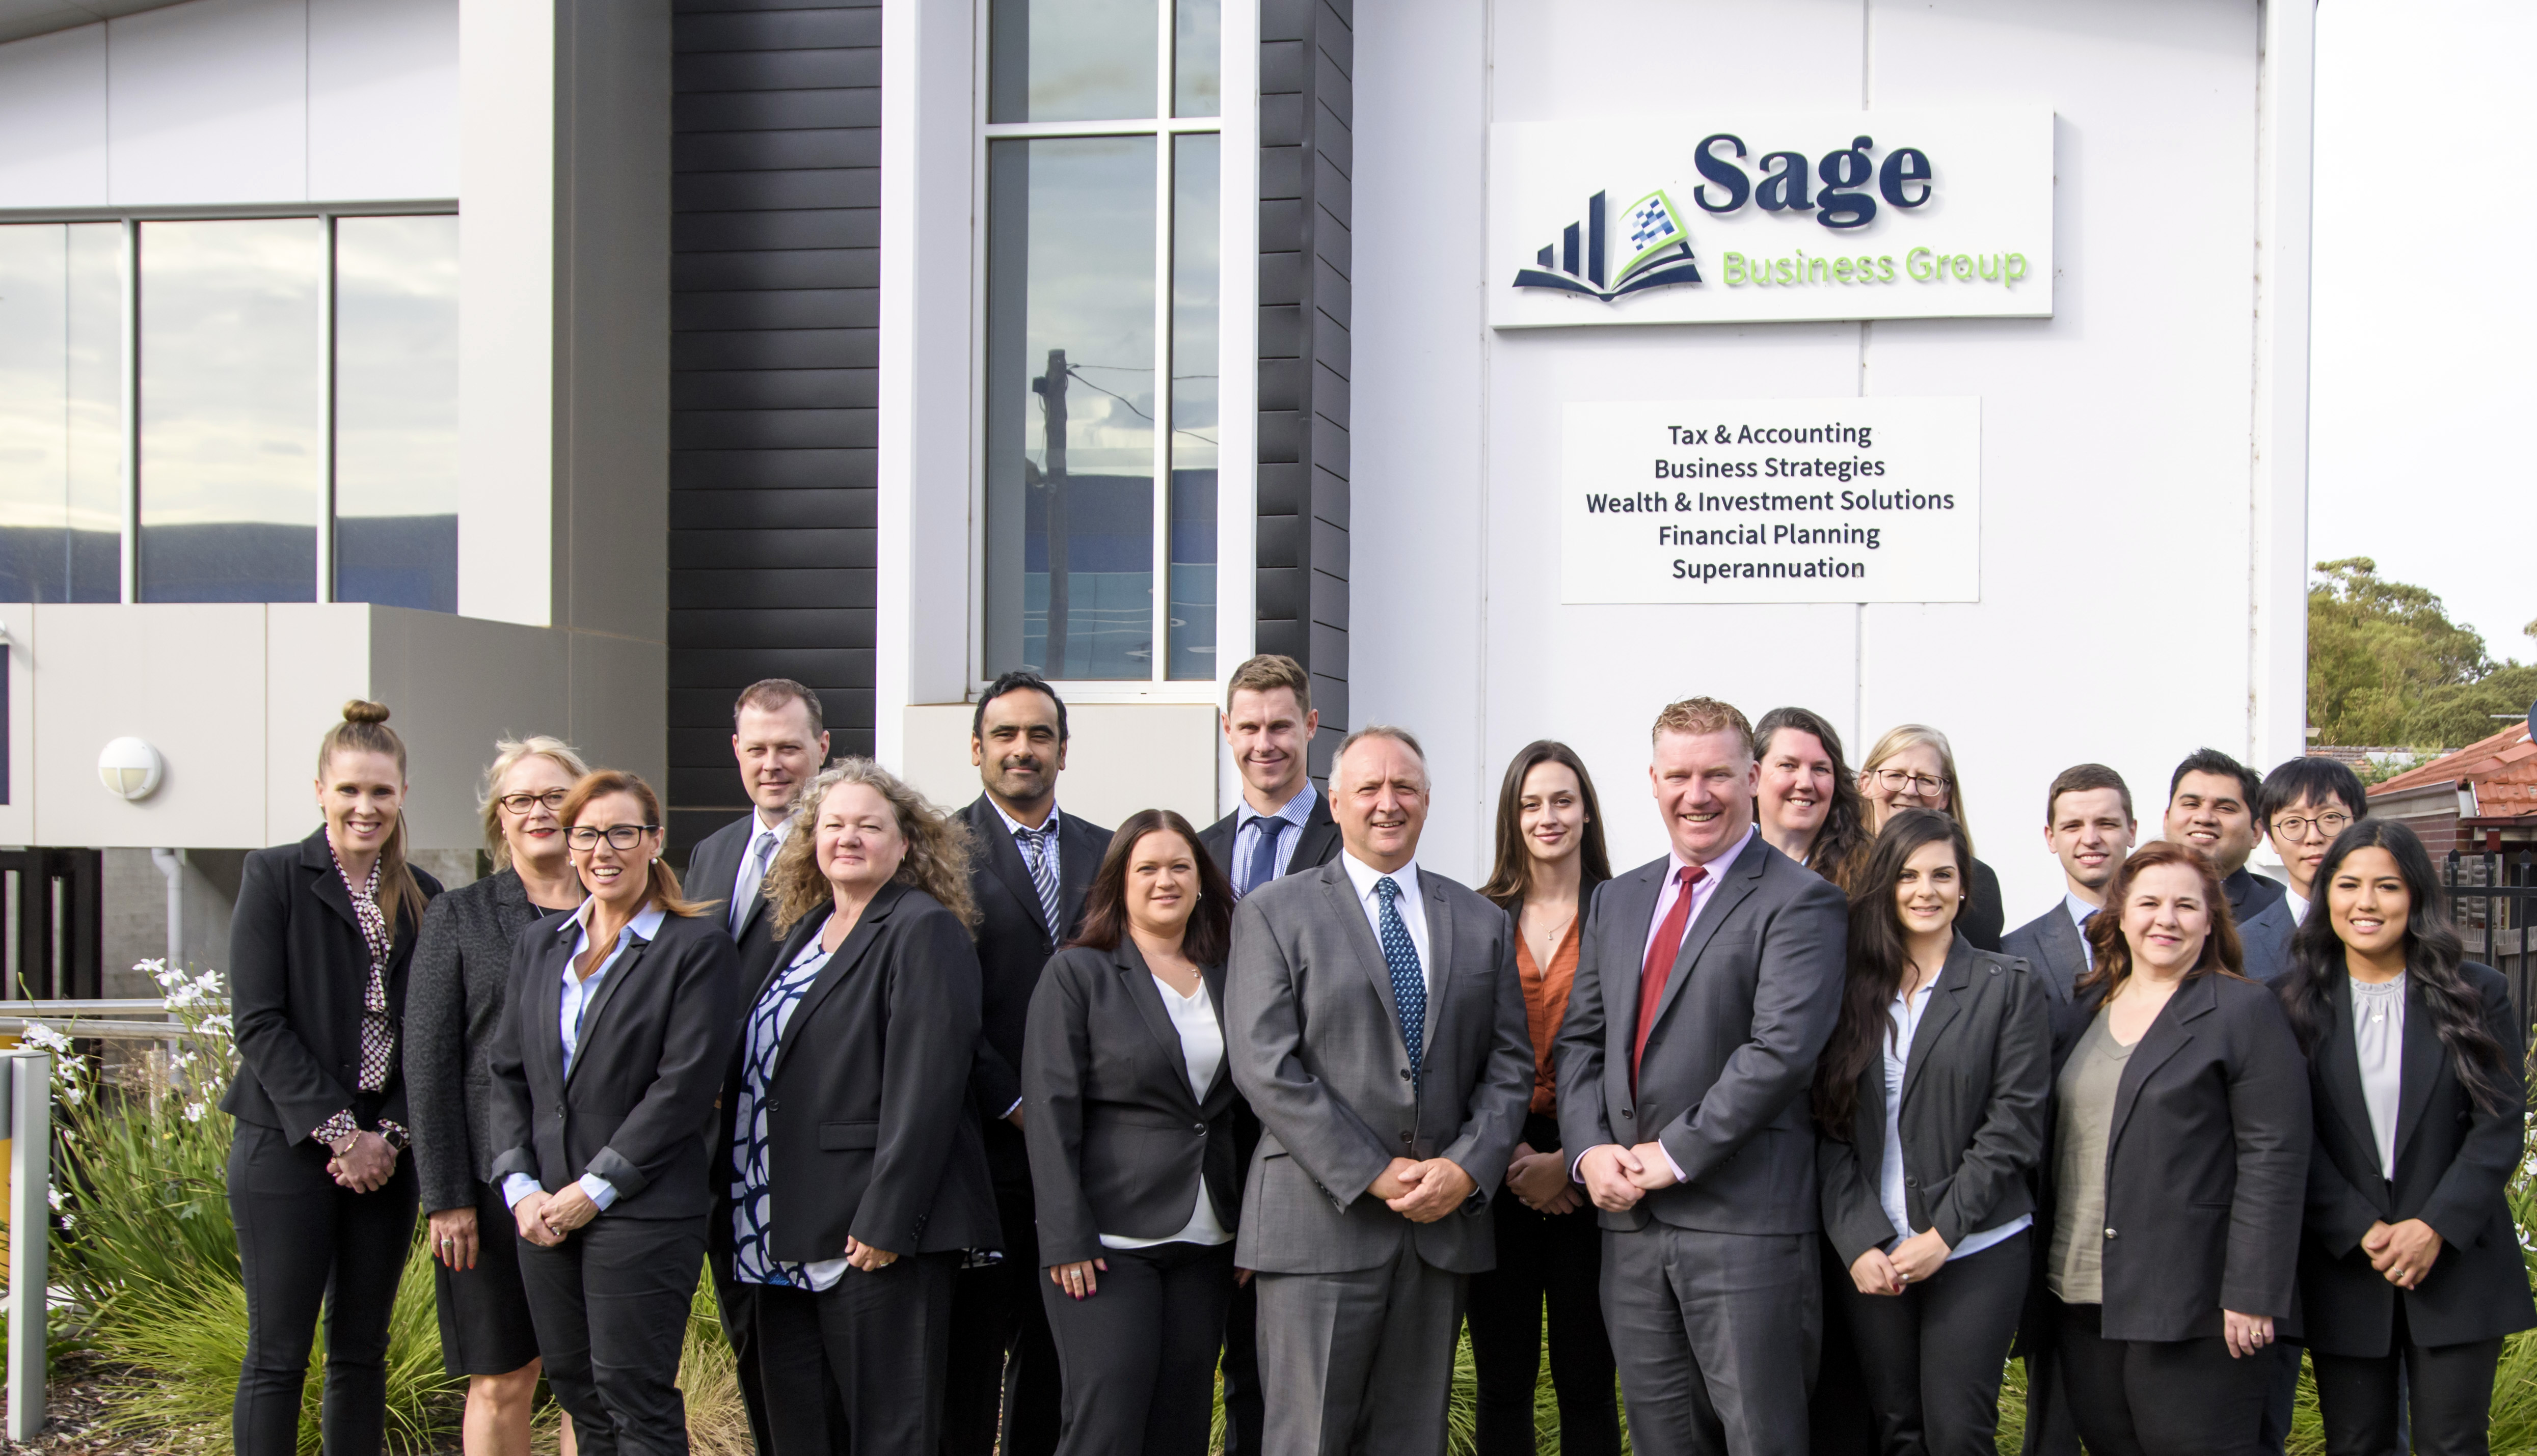 Sage Business Solutions